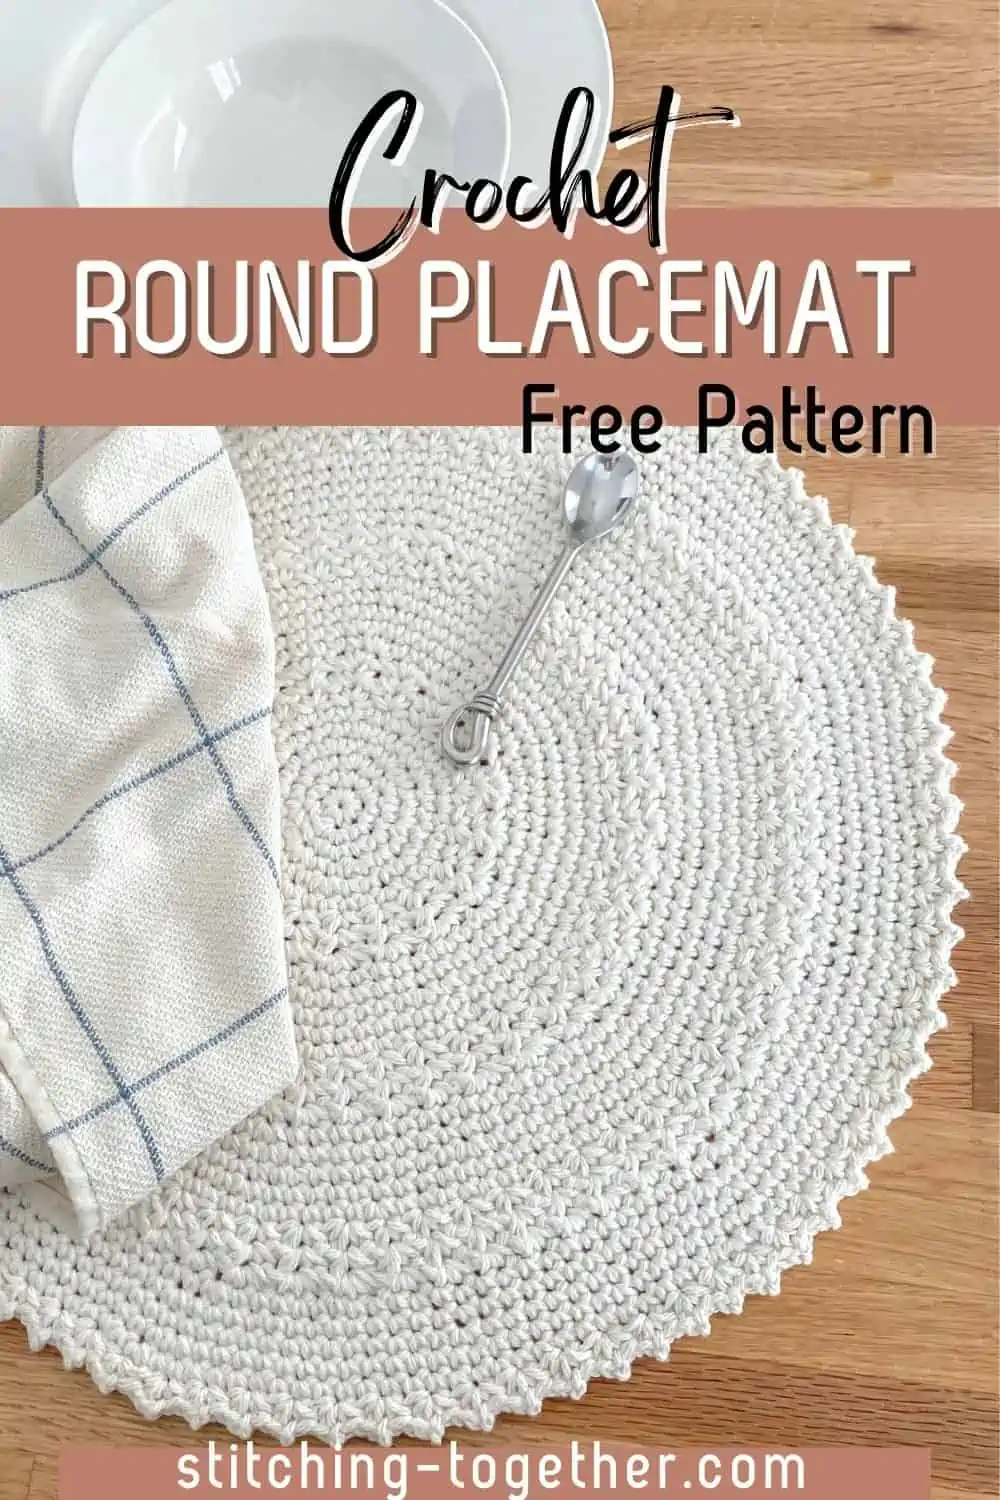 graphic reading "crochet round placemat free pattern" with image of placemat, small spoon, white bowl and a kitchen towel